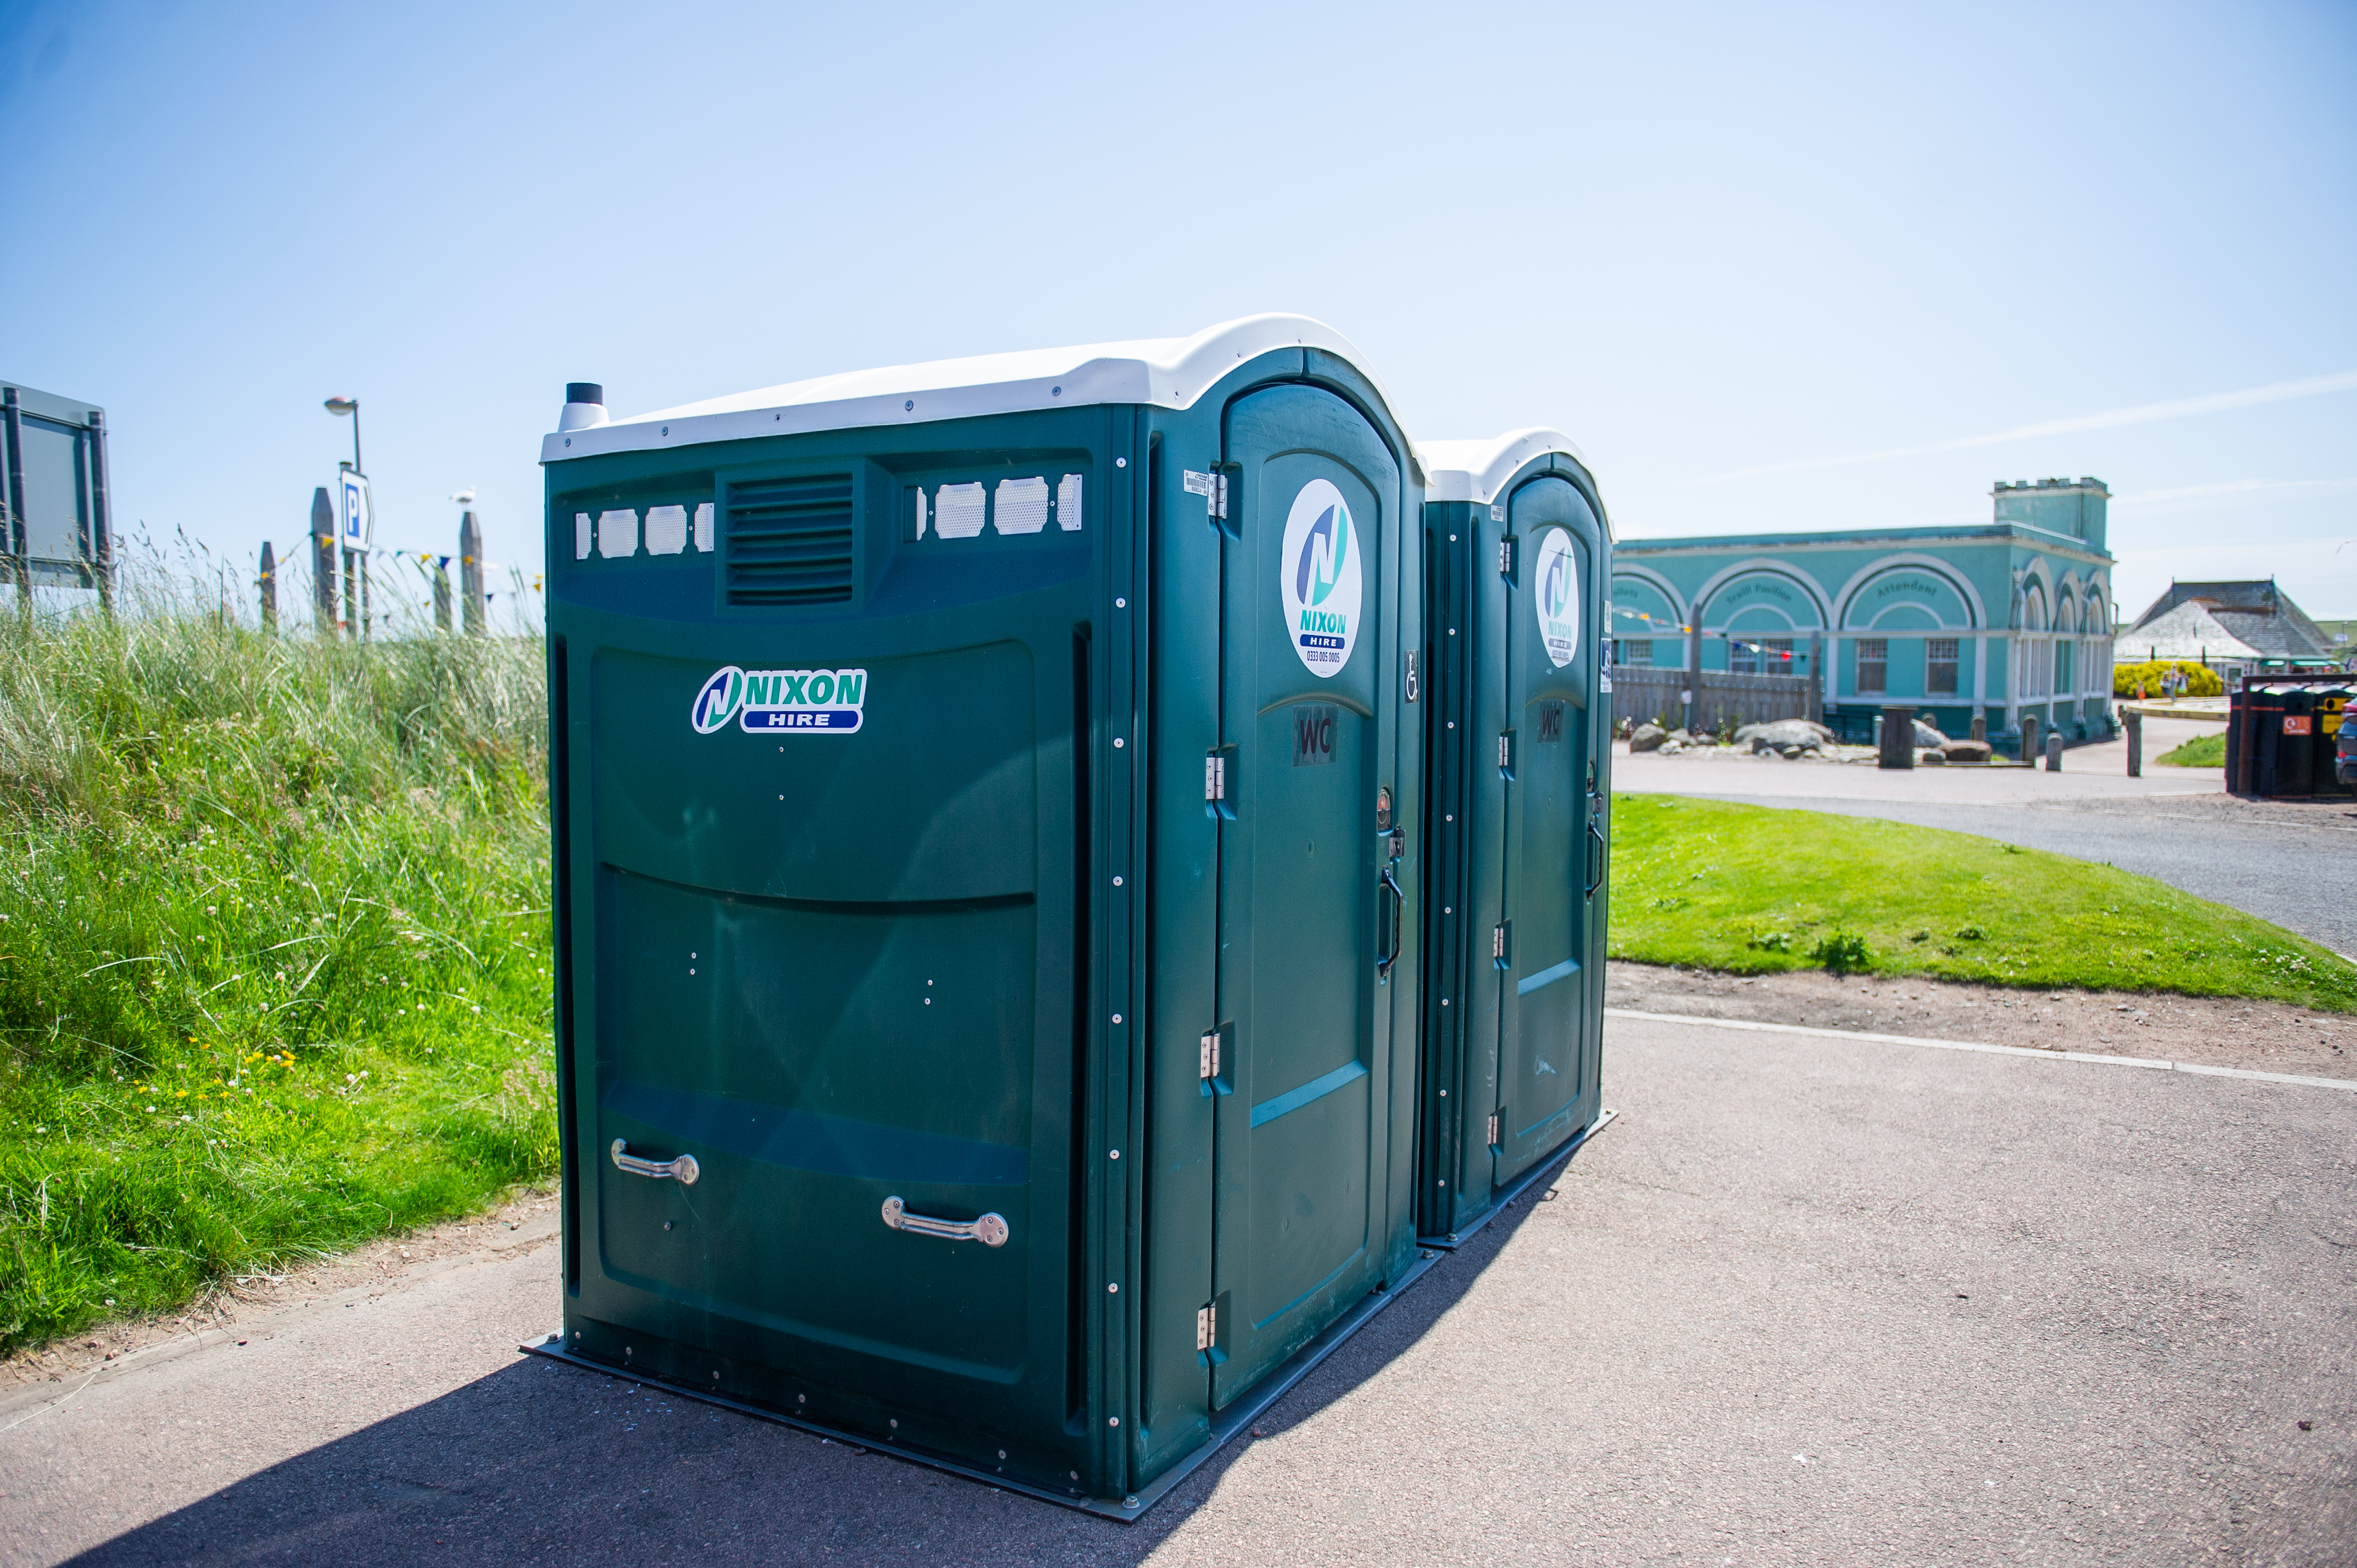 Twoi portable toilets were put in place to cope with up to 1,000 visitors a day at Montrose Seafront Splash.